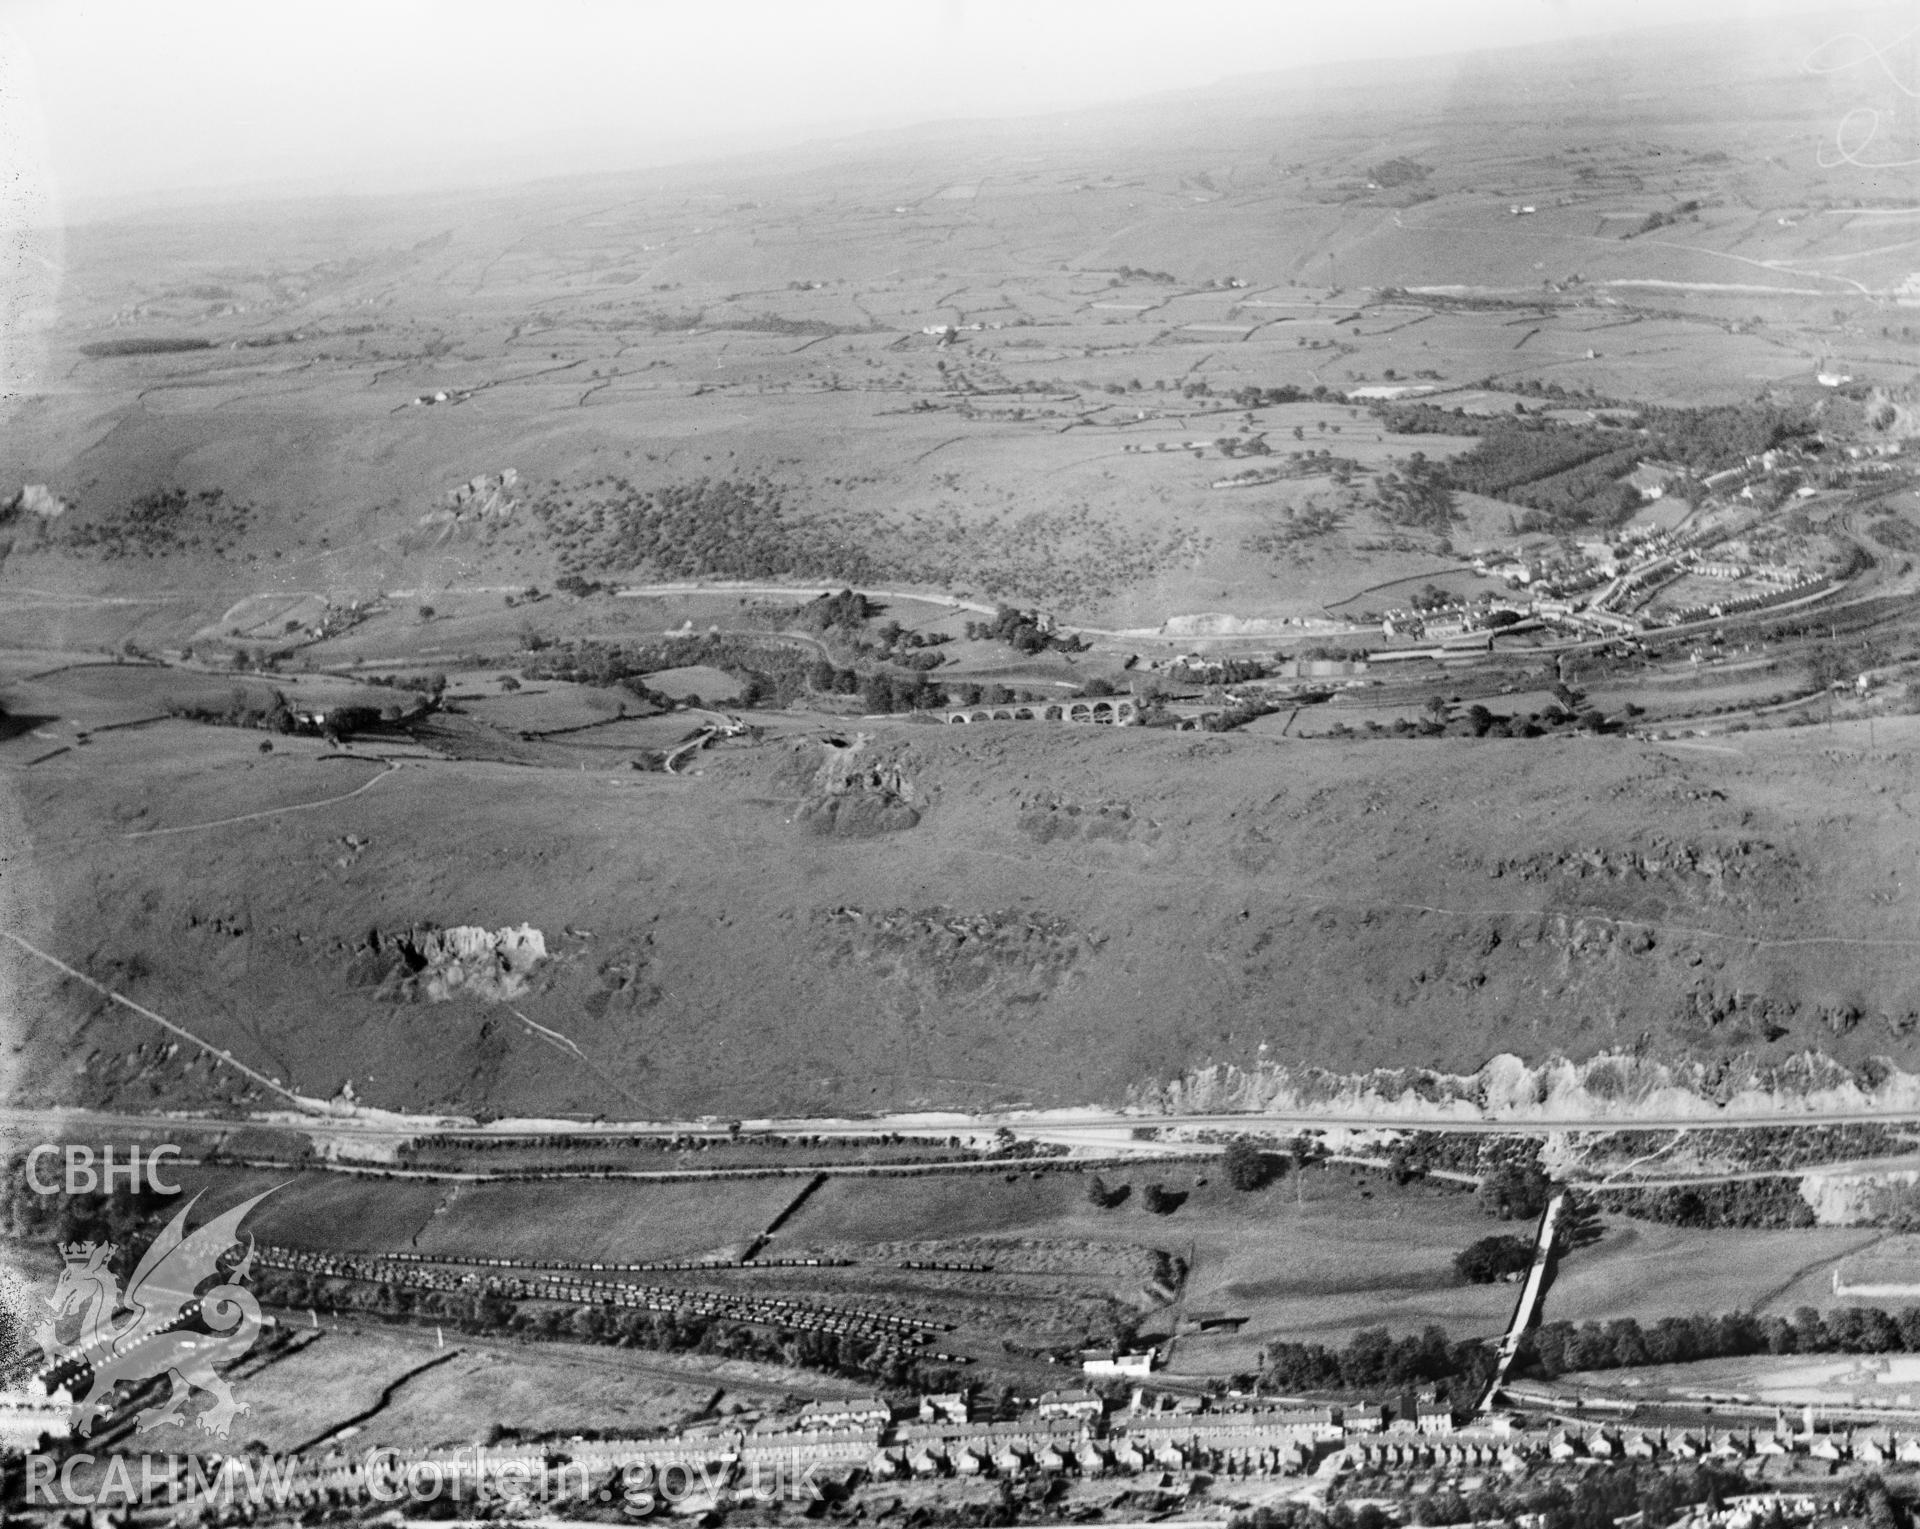 General view of Ynysboeth and Pont Cynon, oblique aerial view. 5?x4? black and white glass plate negative.